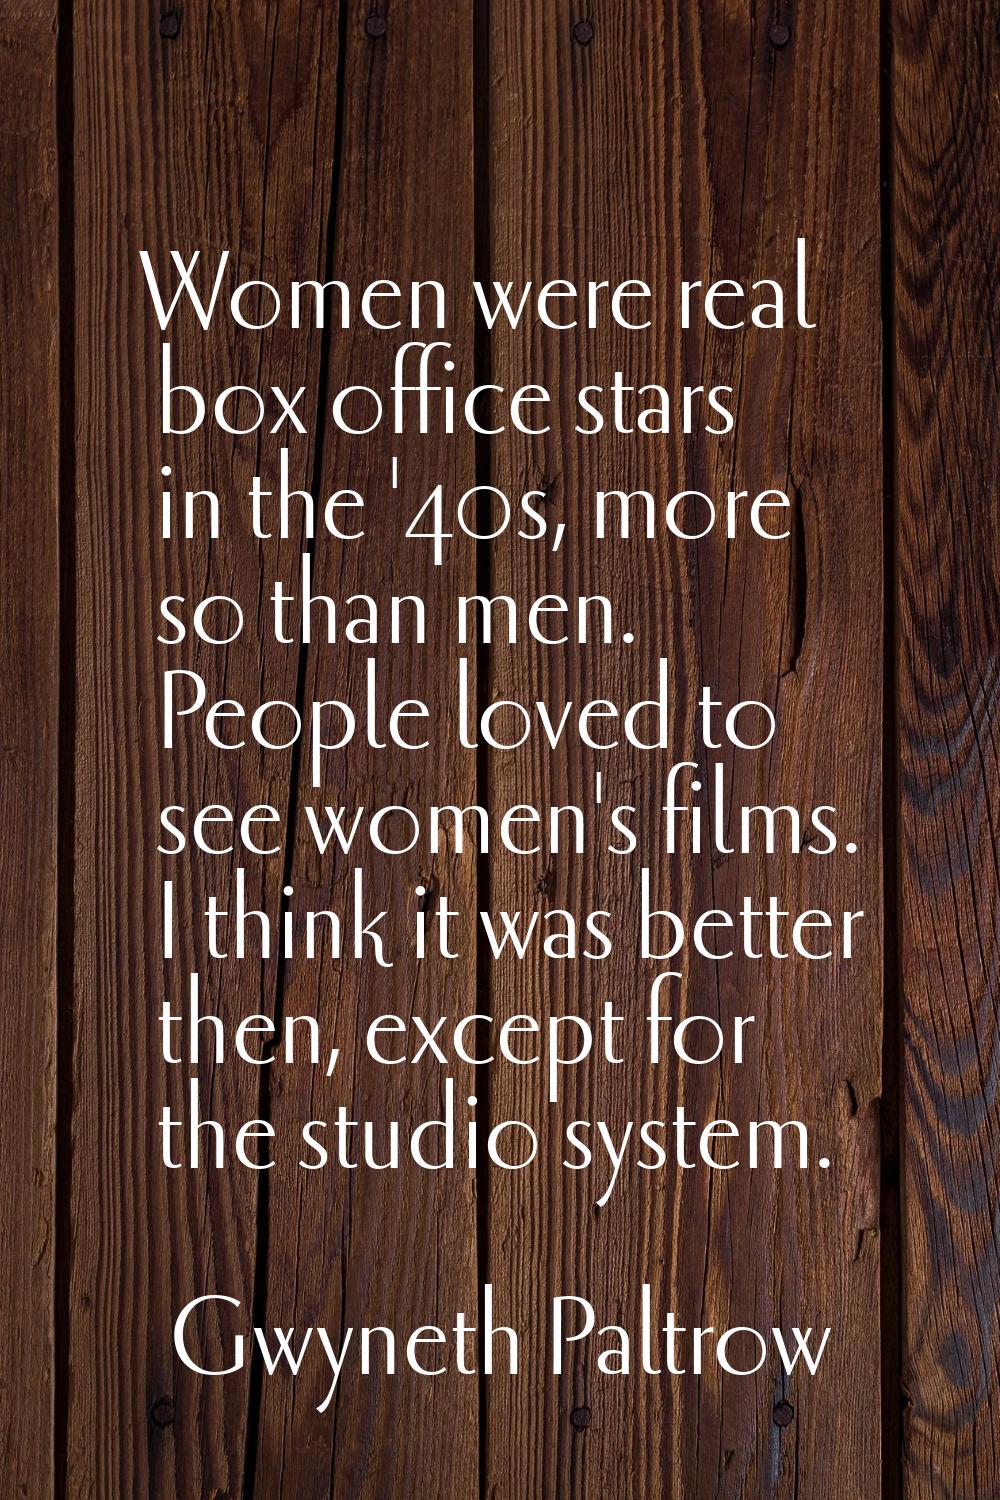 Women were real box office stars in the '40s, more so than men. People loved to see women's films. 